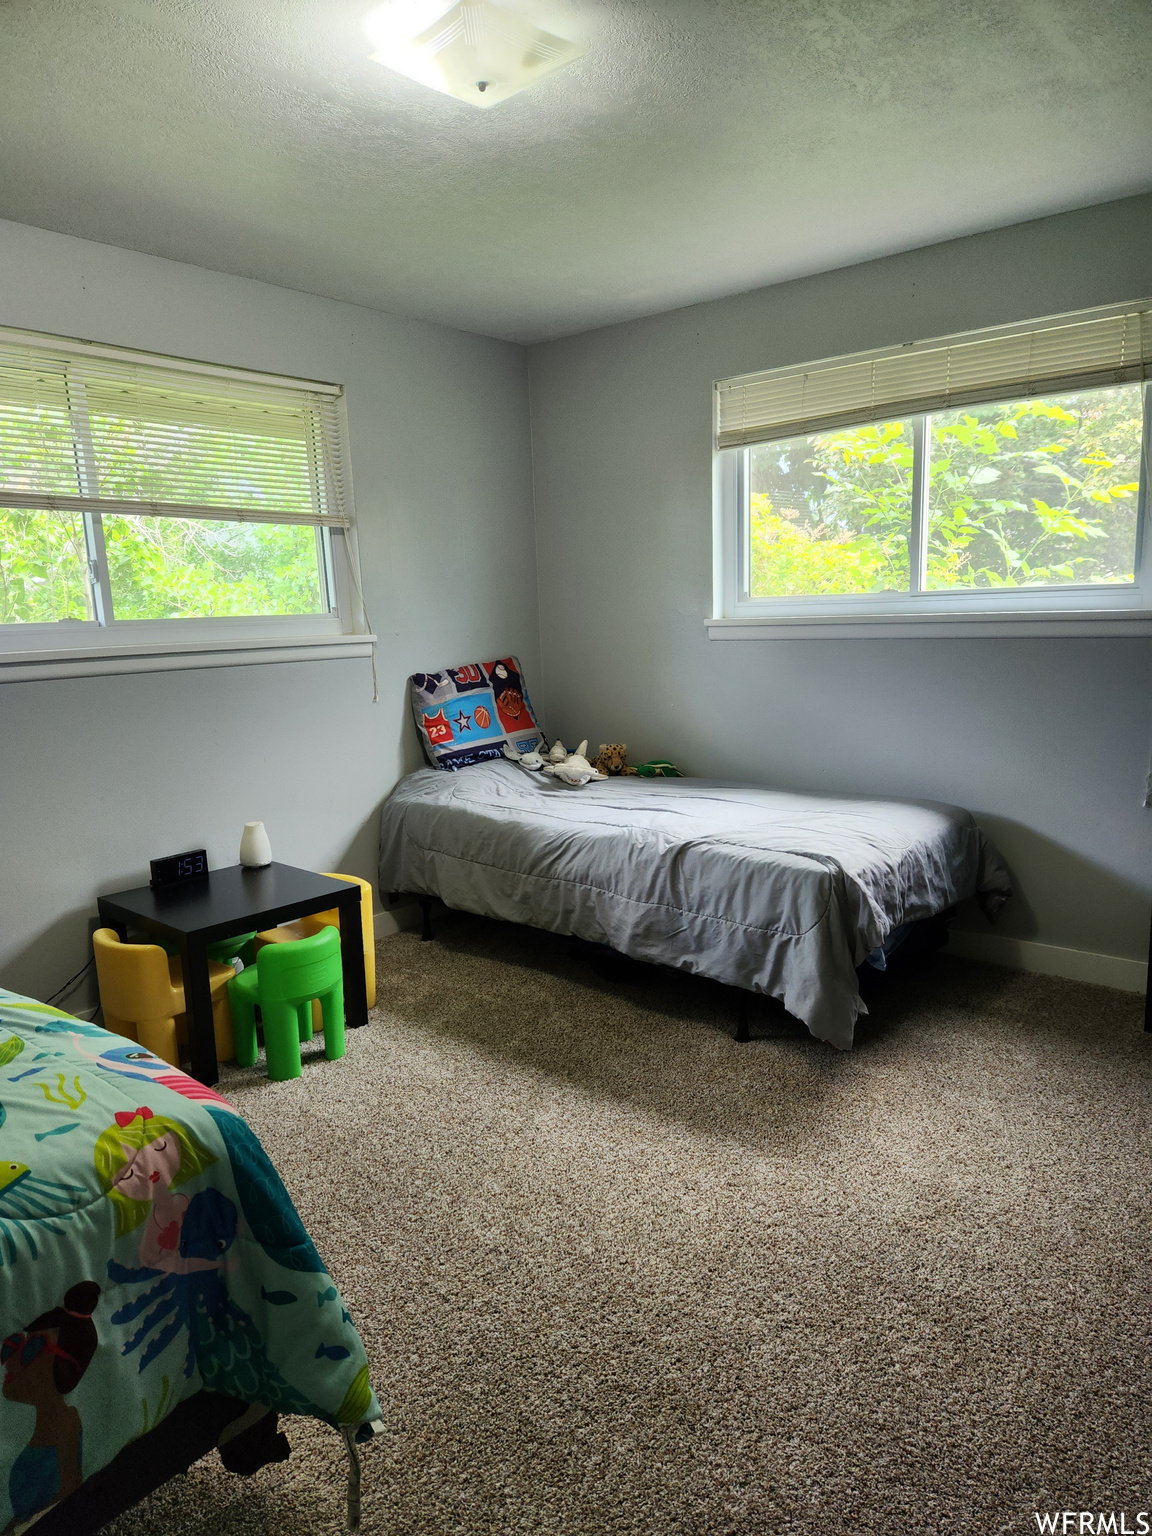 Bedroom with a textured ceiling and carpet